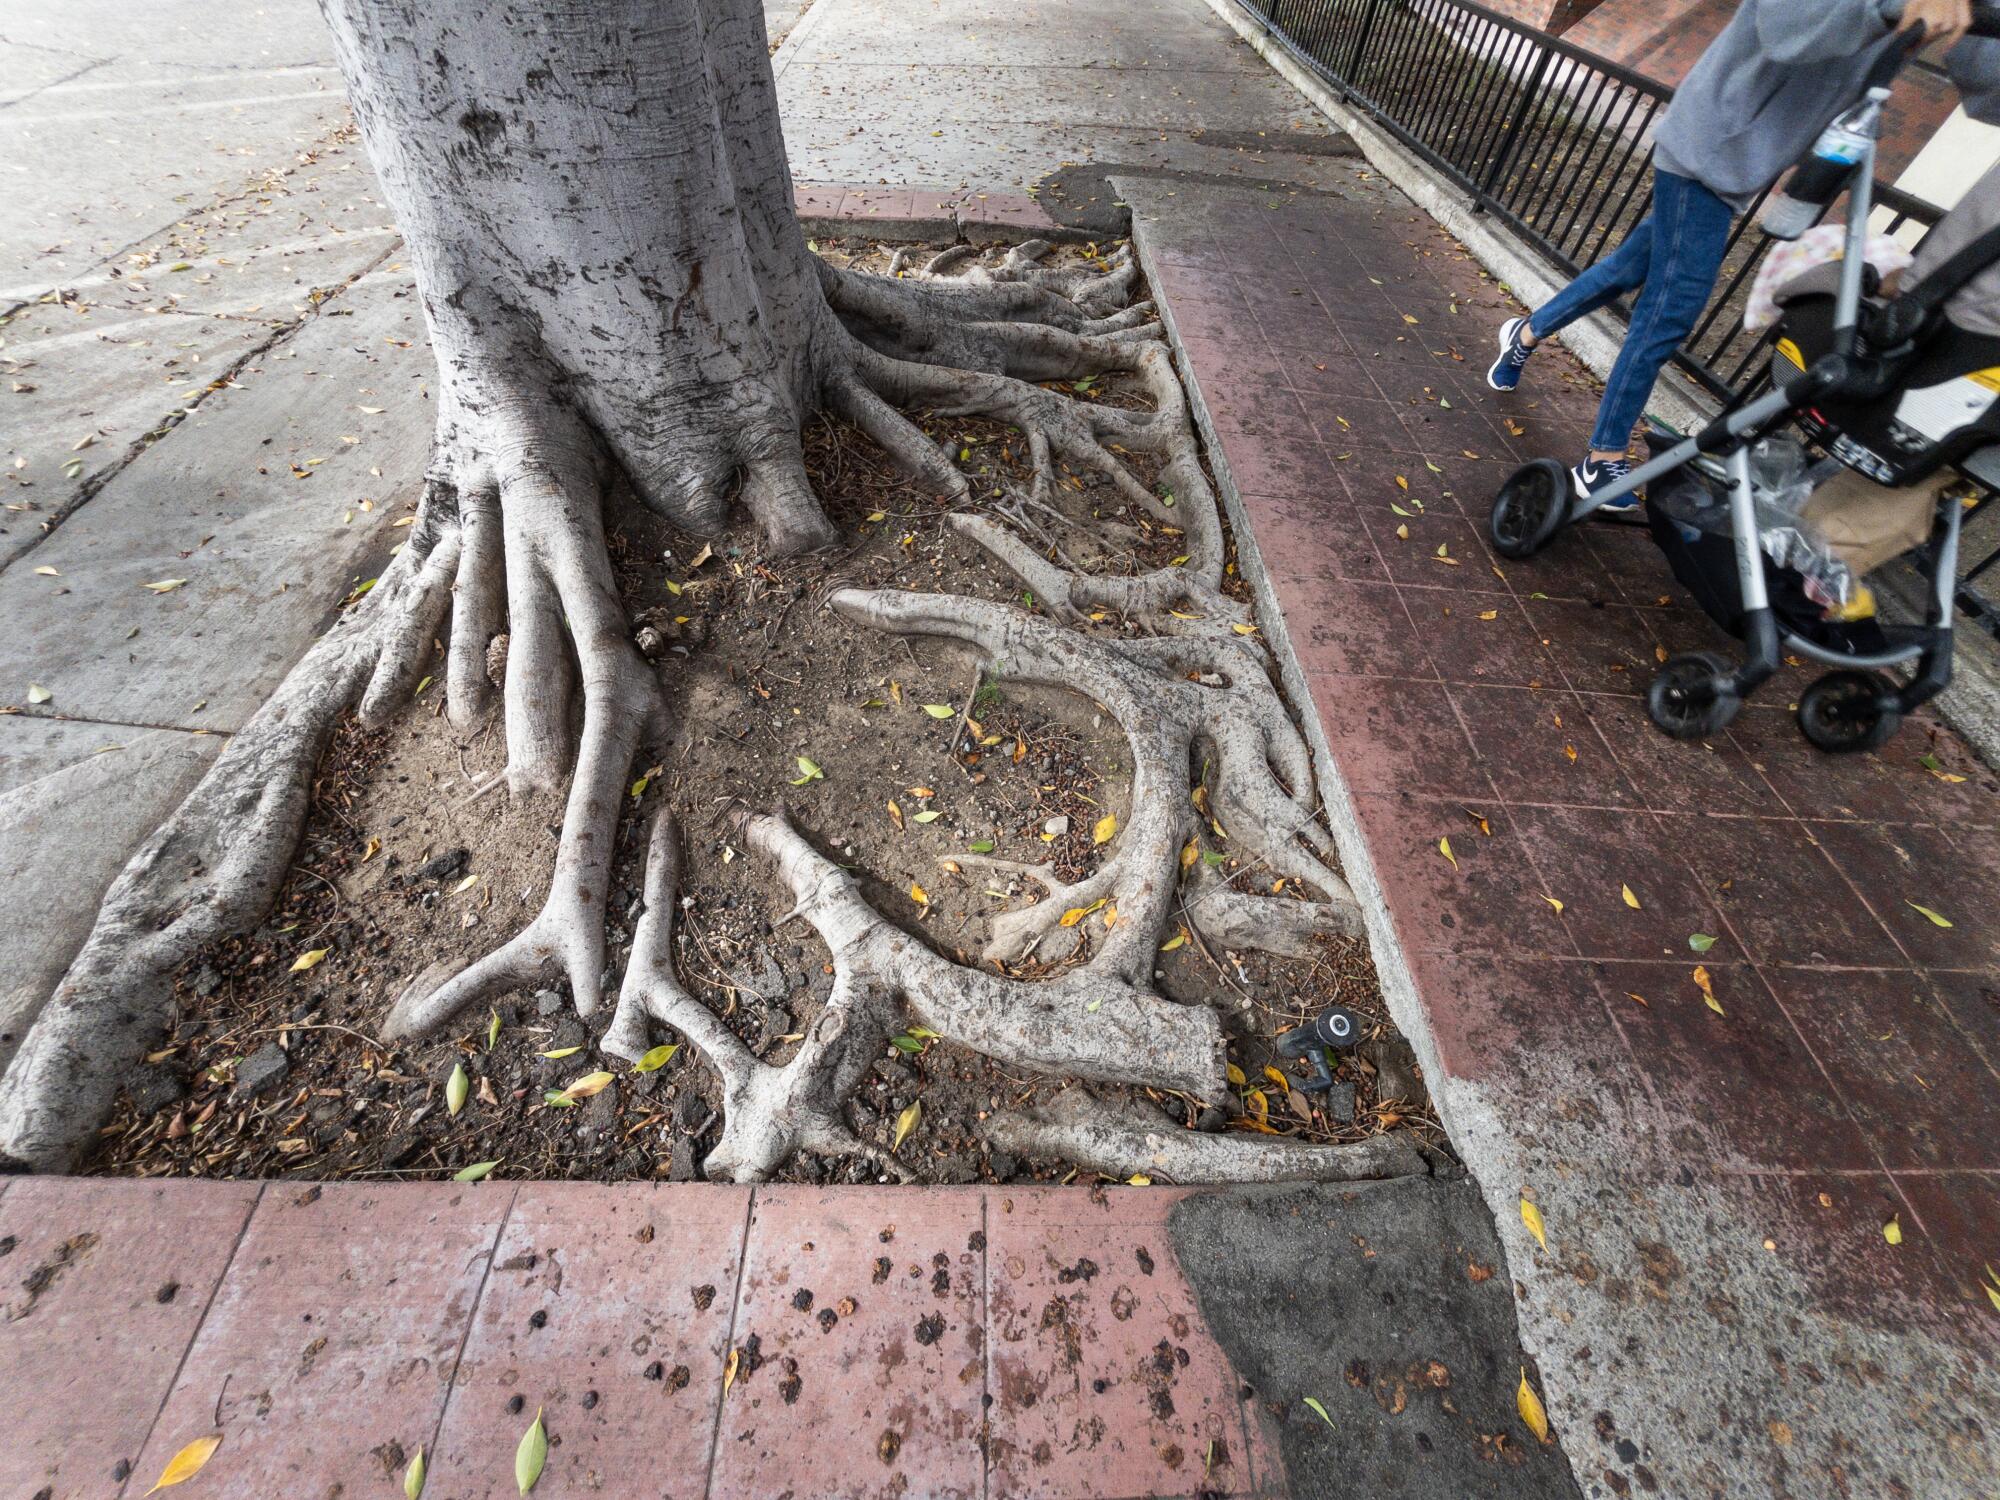 The underside of a tree with exposed roots on a sidewalk.